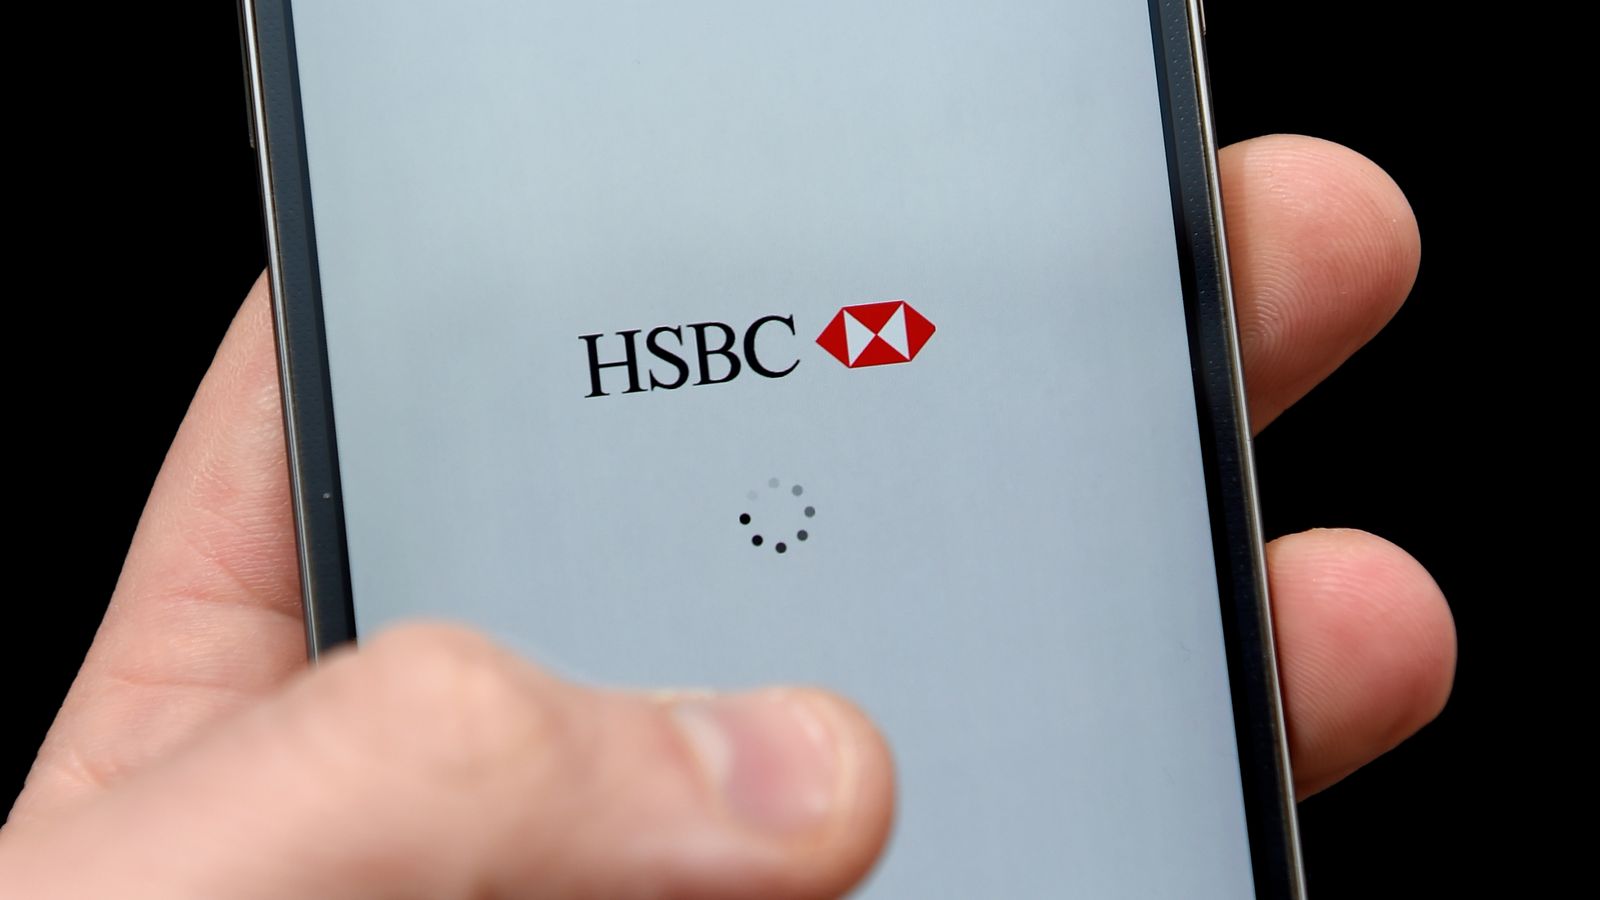 HSBC buys Silicon Valley Bank UK for £1 in deal which 'protects customers and taxpayers'